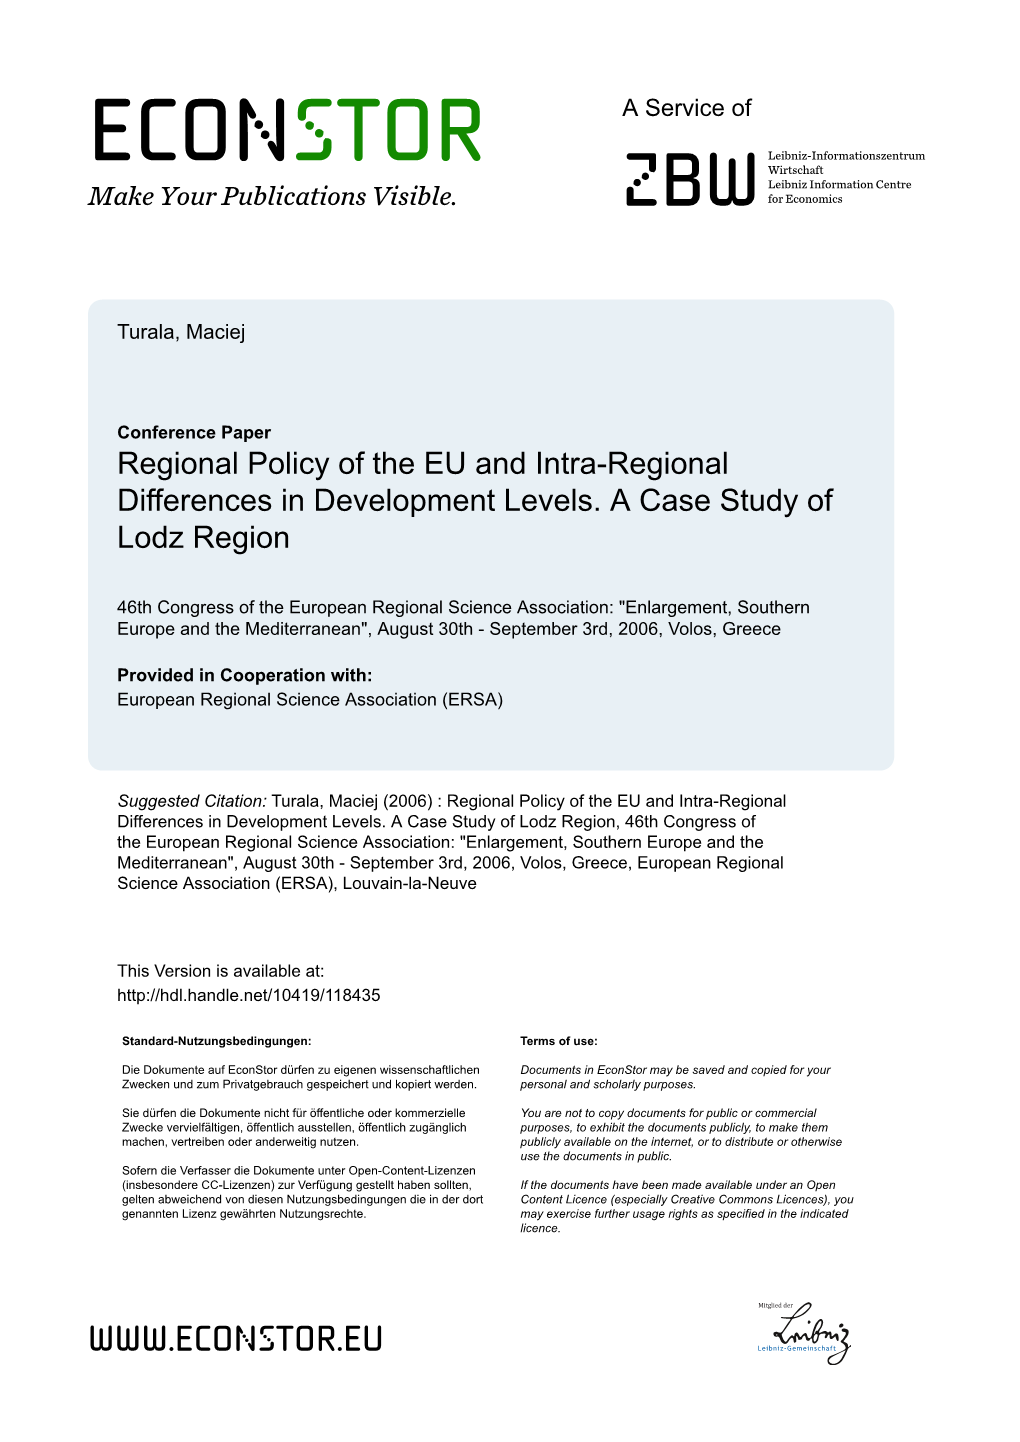 Regional Policy of the EU and Intra-Regional Differences in Development Levels